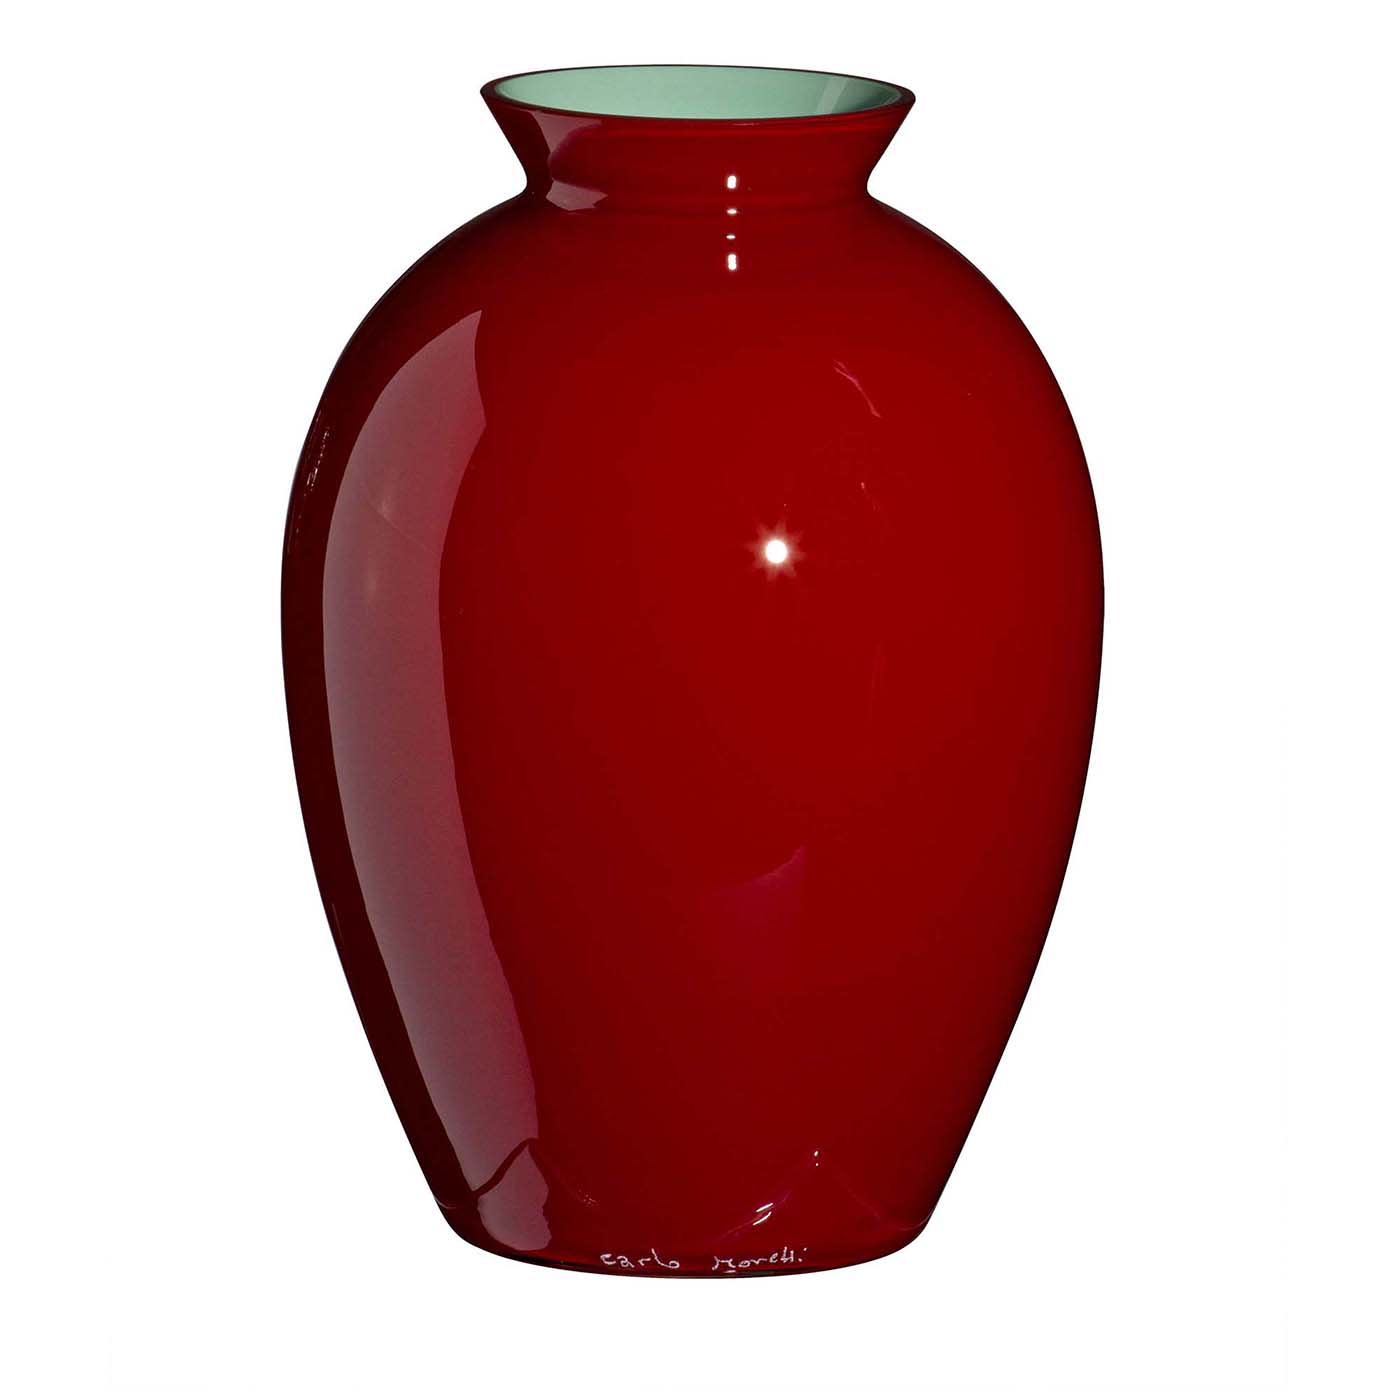 Lopas Small Red and Turquoise Vase by Carlo Moretti - Carlo Moretti